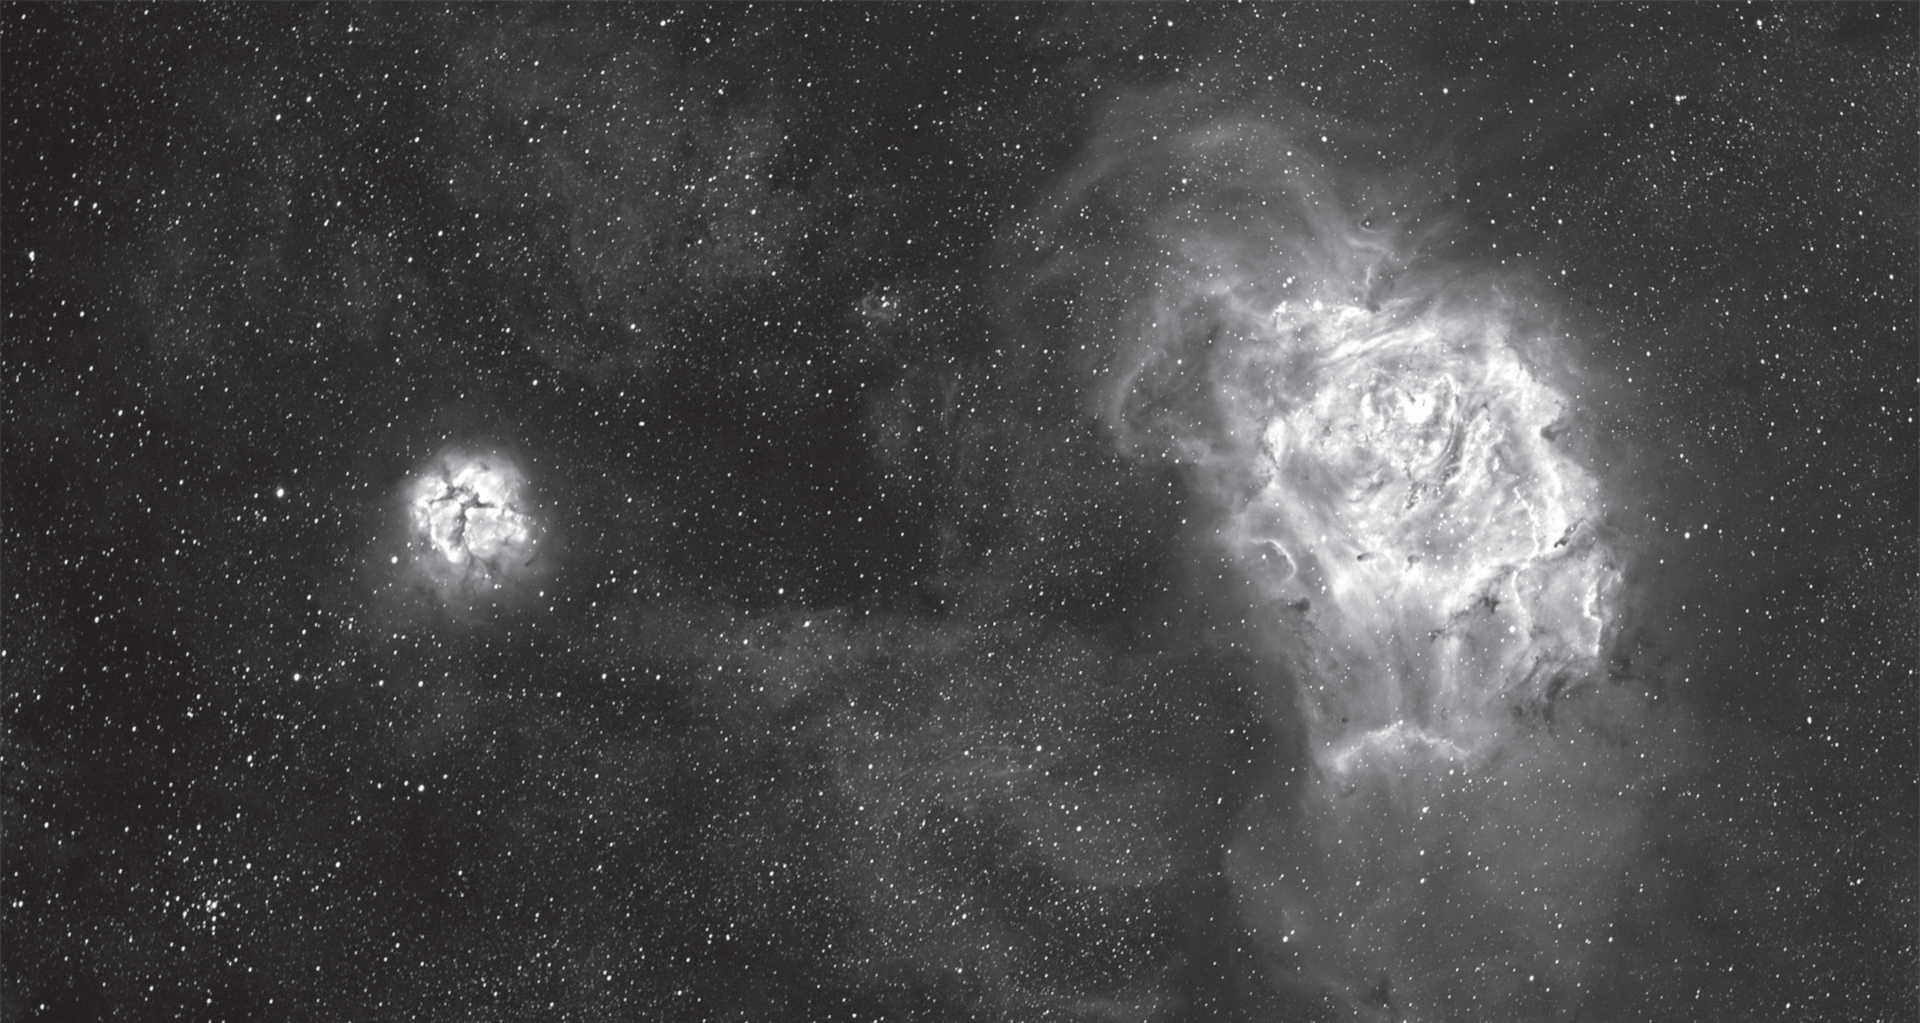 The Lagoon Nebula and the Trifid Nebula (M 8 and M 20) in the constellation of Sagittarius. Composite picture of six images with an exposure time of 1 minute each, six with an exposure time of 15 minutes each and two with an exposure time of 60 minutes each. Camera:SBIG STF-8300, Hα filter with 35 nm bandpass, telescope: 130 mm refractor with 1,000 mm focal length. U. Dittler